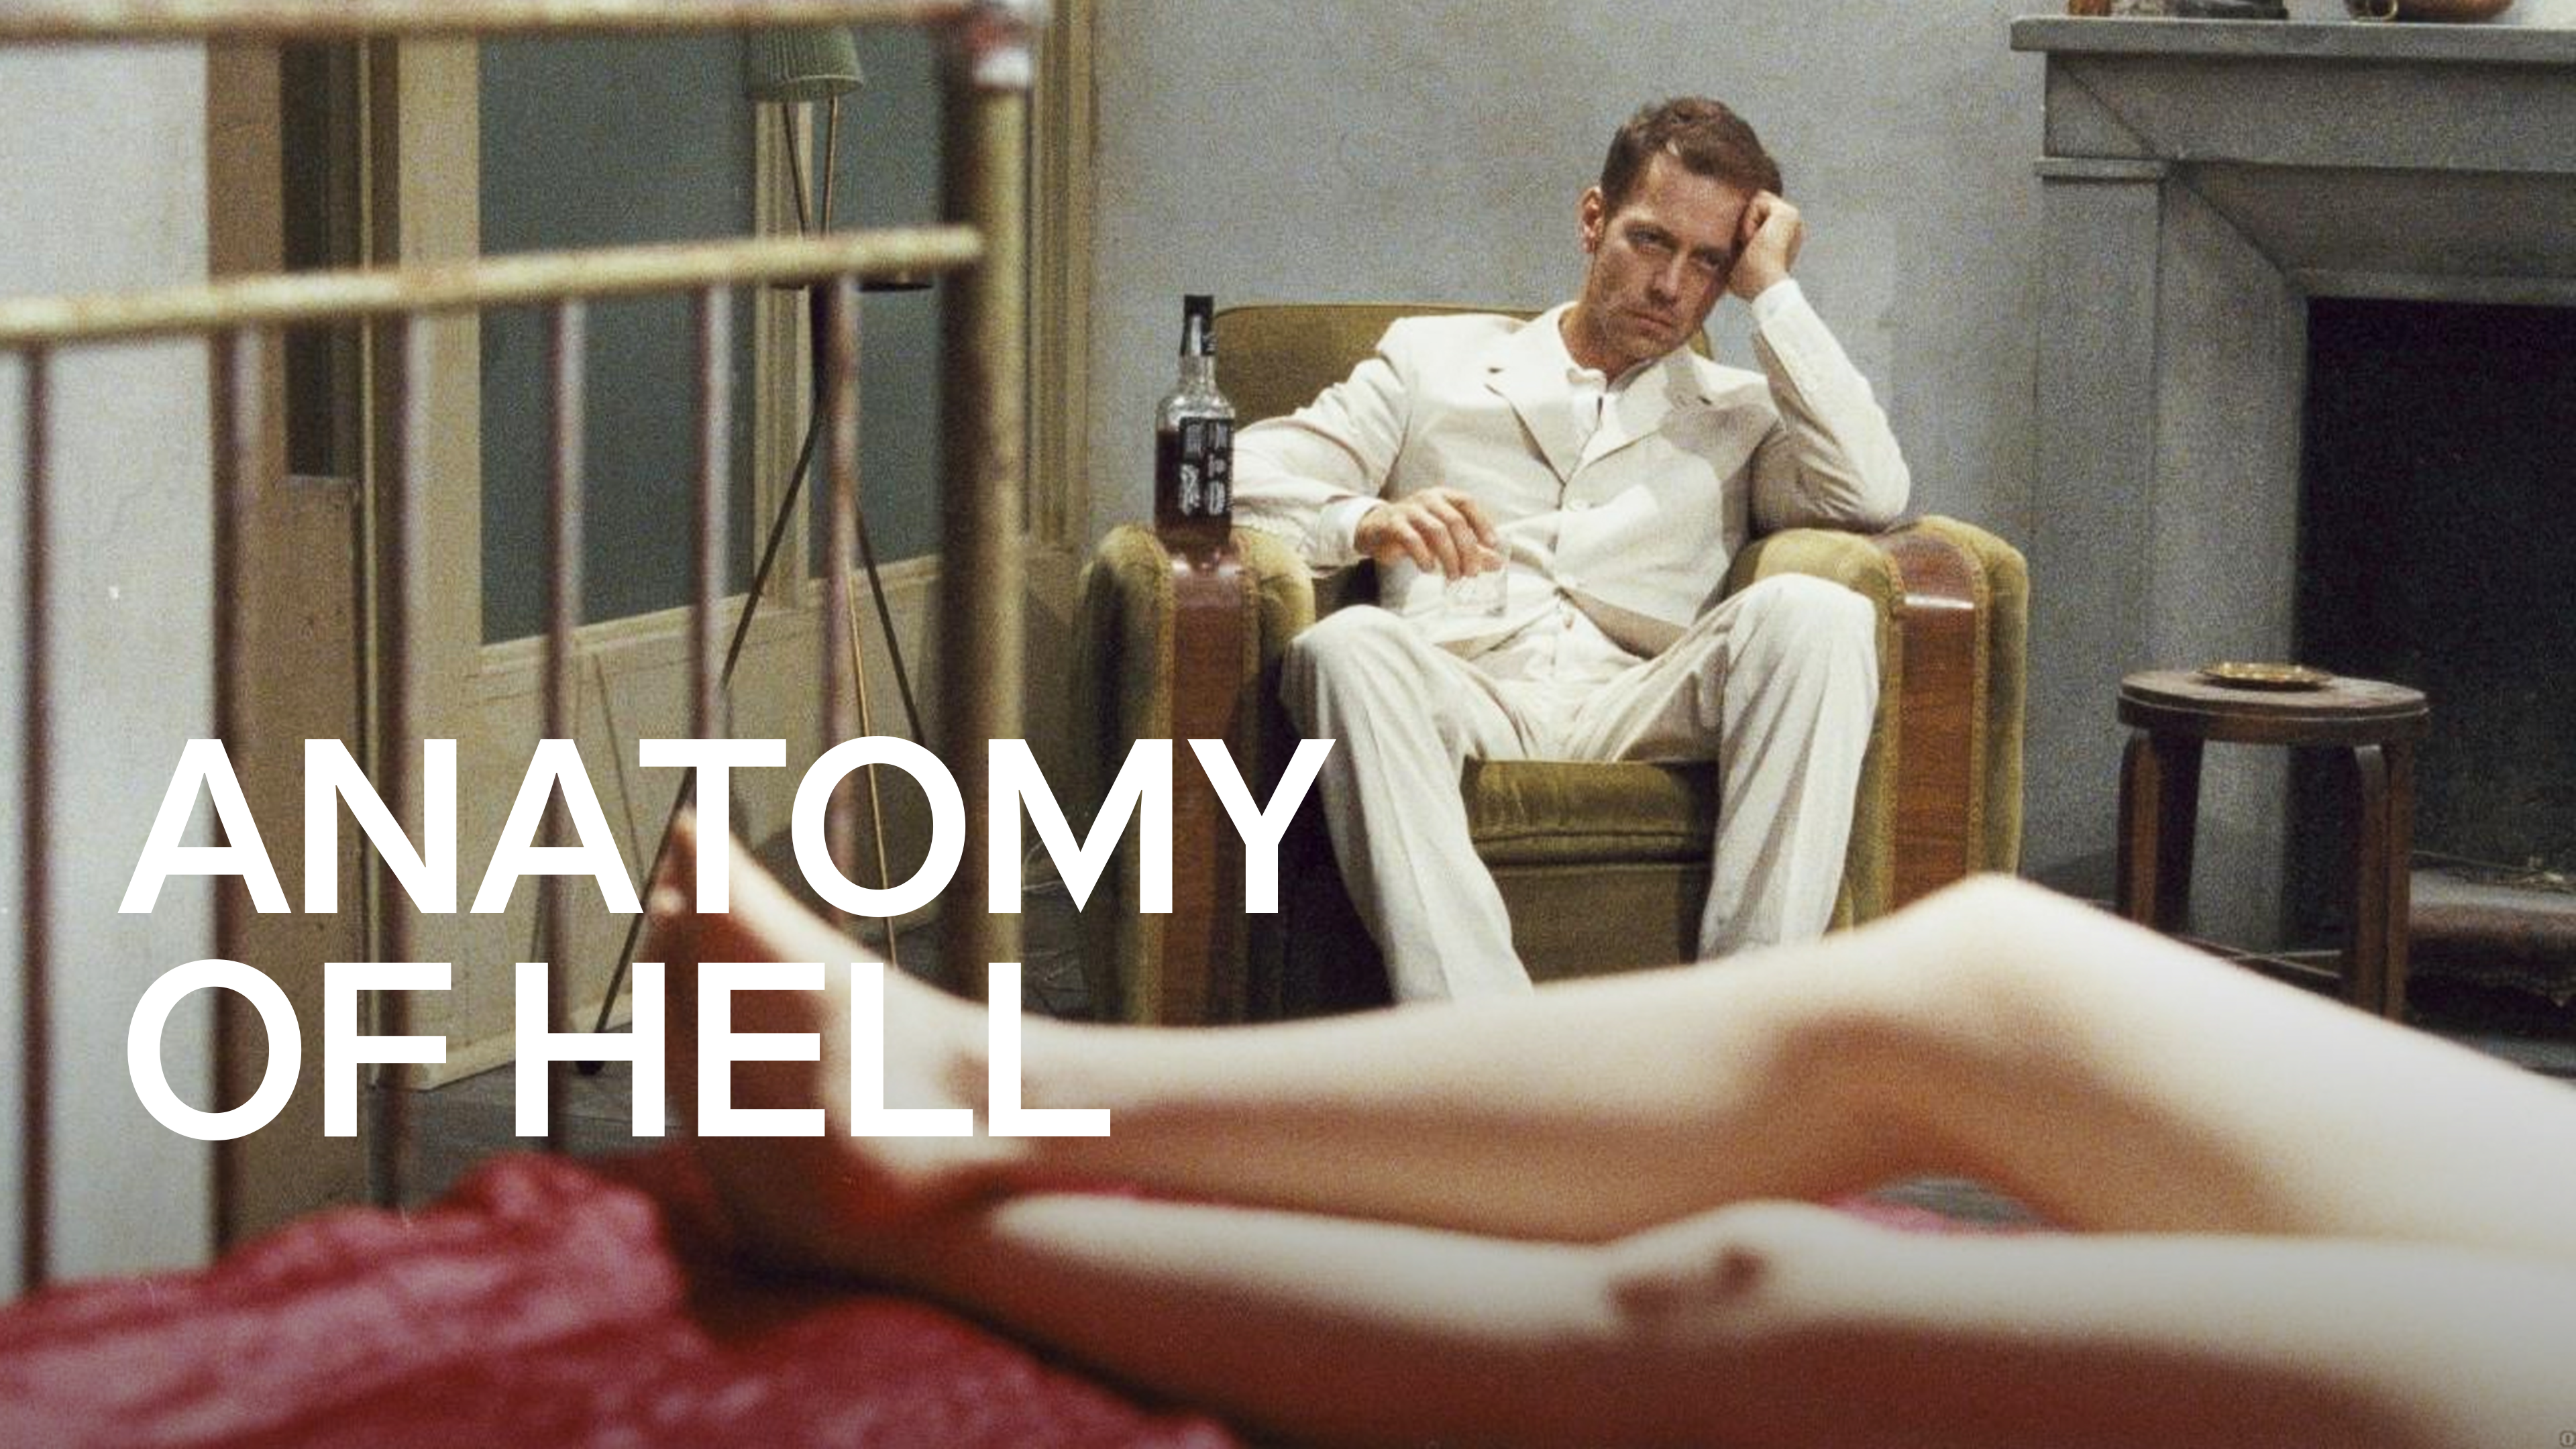 darlene buchman recommends anatomy of hell sex pic